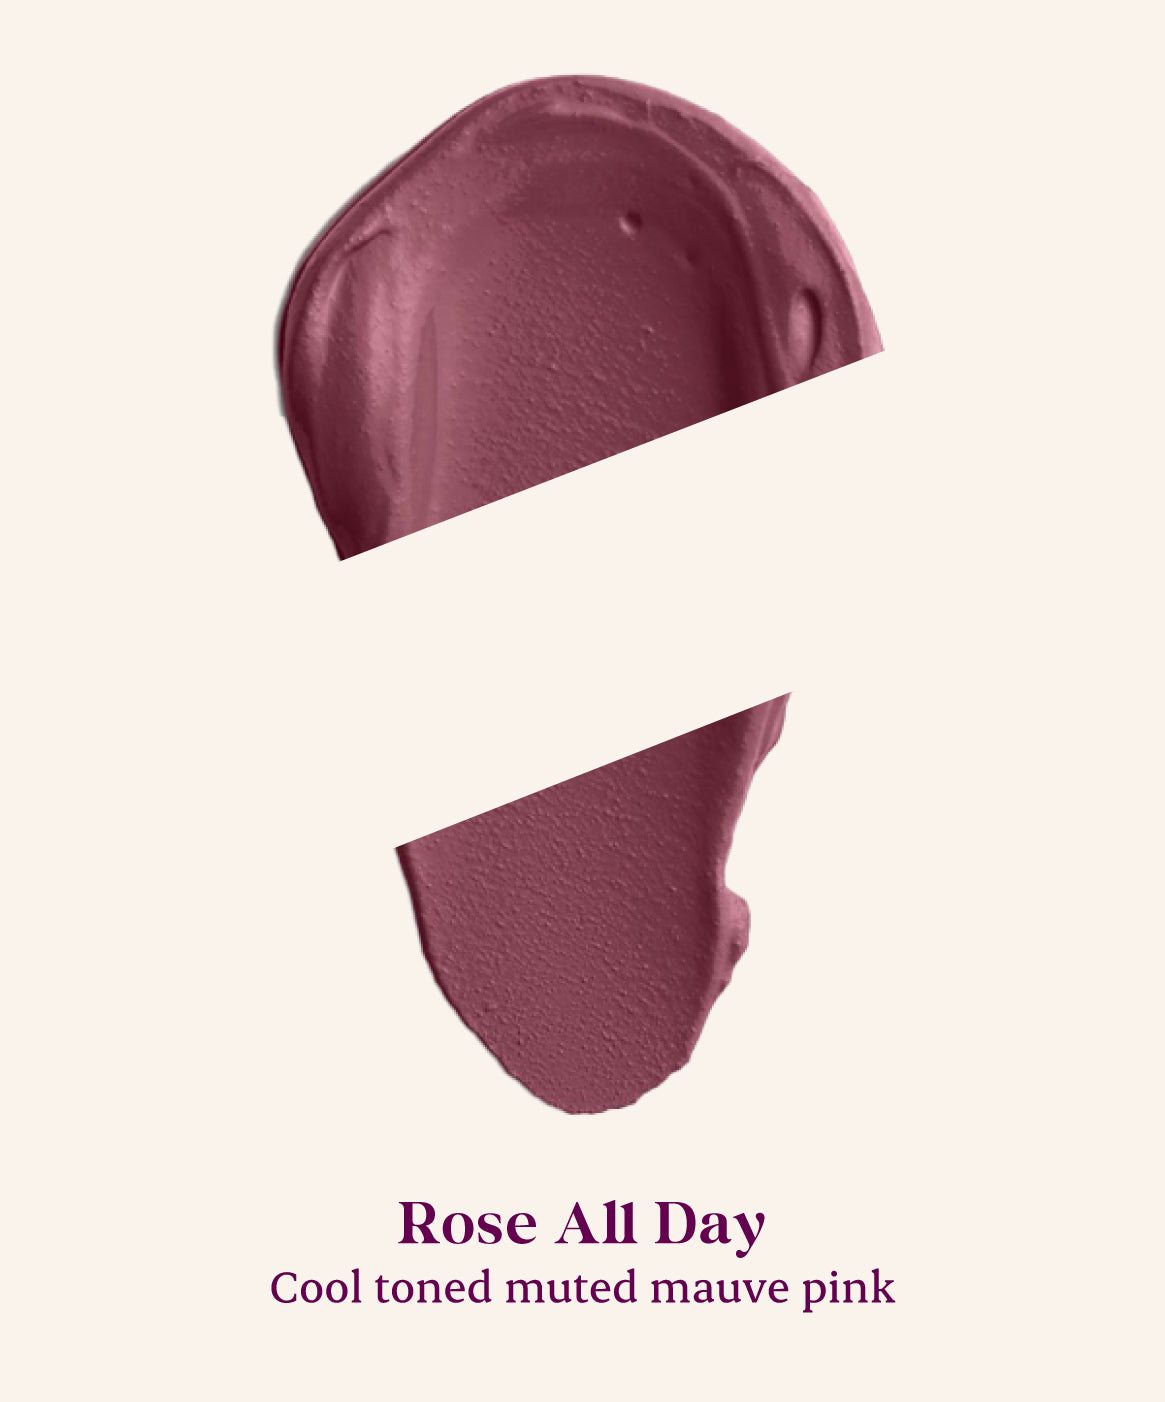 Rose all Day 01 - Cool toned muted mauve pink